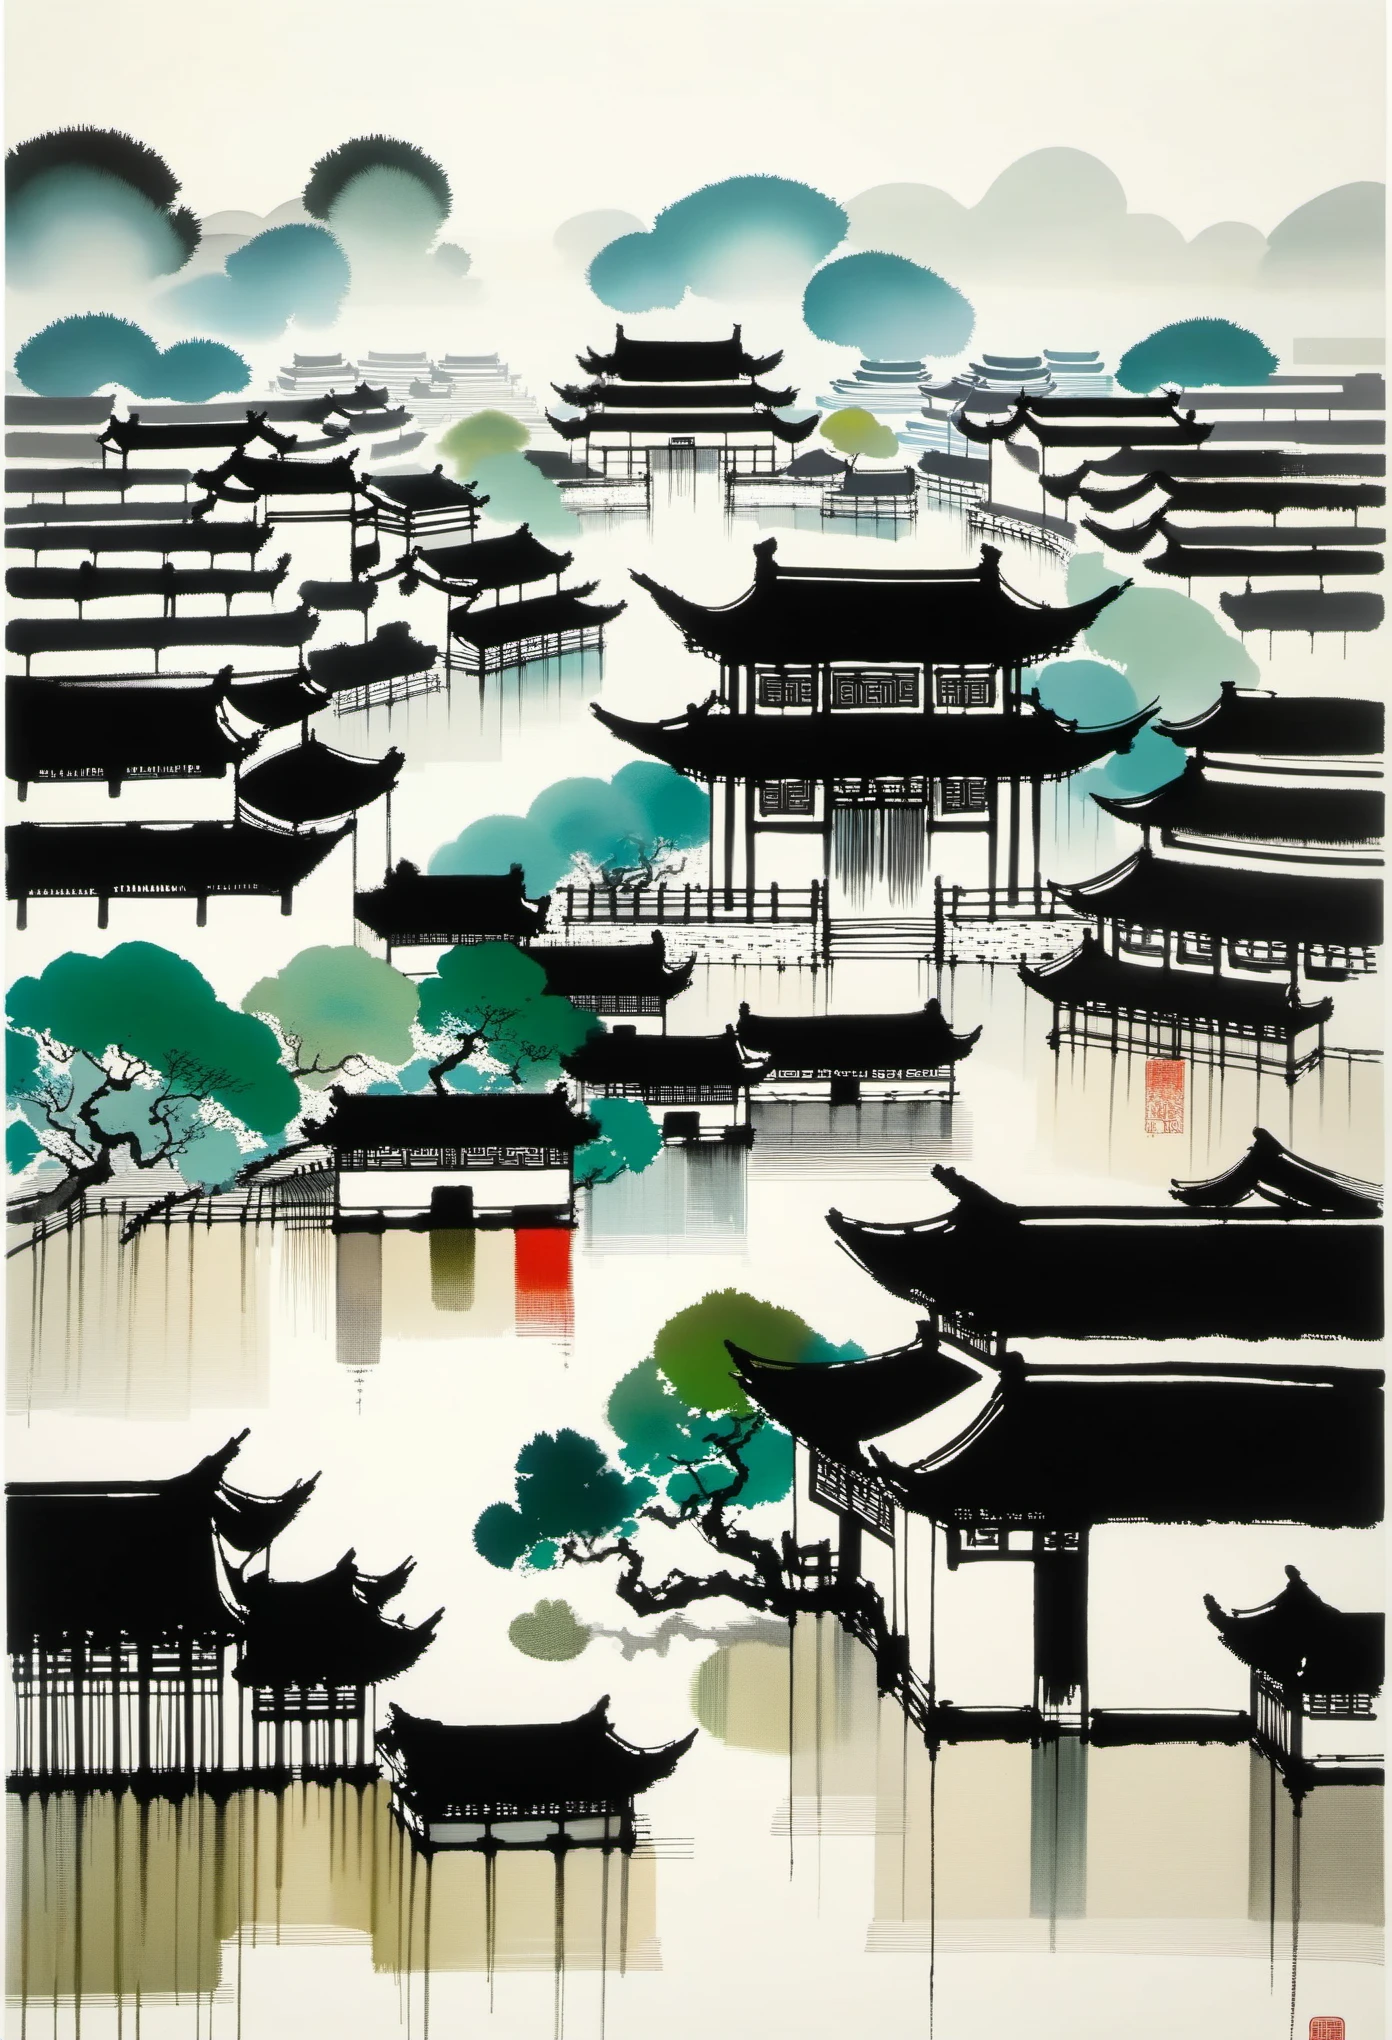 Geometric abstract ink，Describe the Jiangnan landscape architectural complex，Wu Guanzhong's style is an artistic expression that merges traditional Chinese ink techniques with Western painting concepts. It is characterized by modern interpretations of traditional themes, creating unique visual effects through color and line.